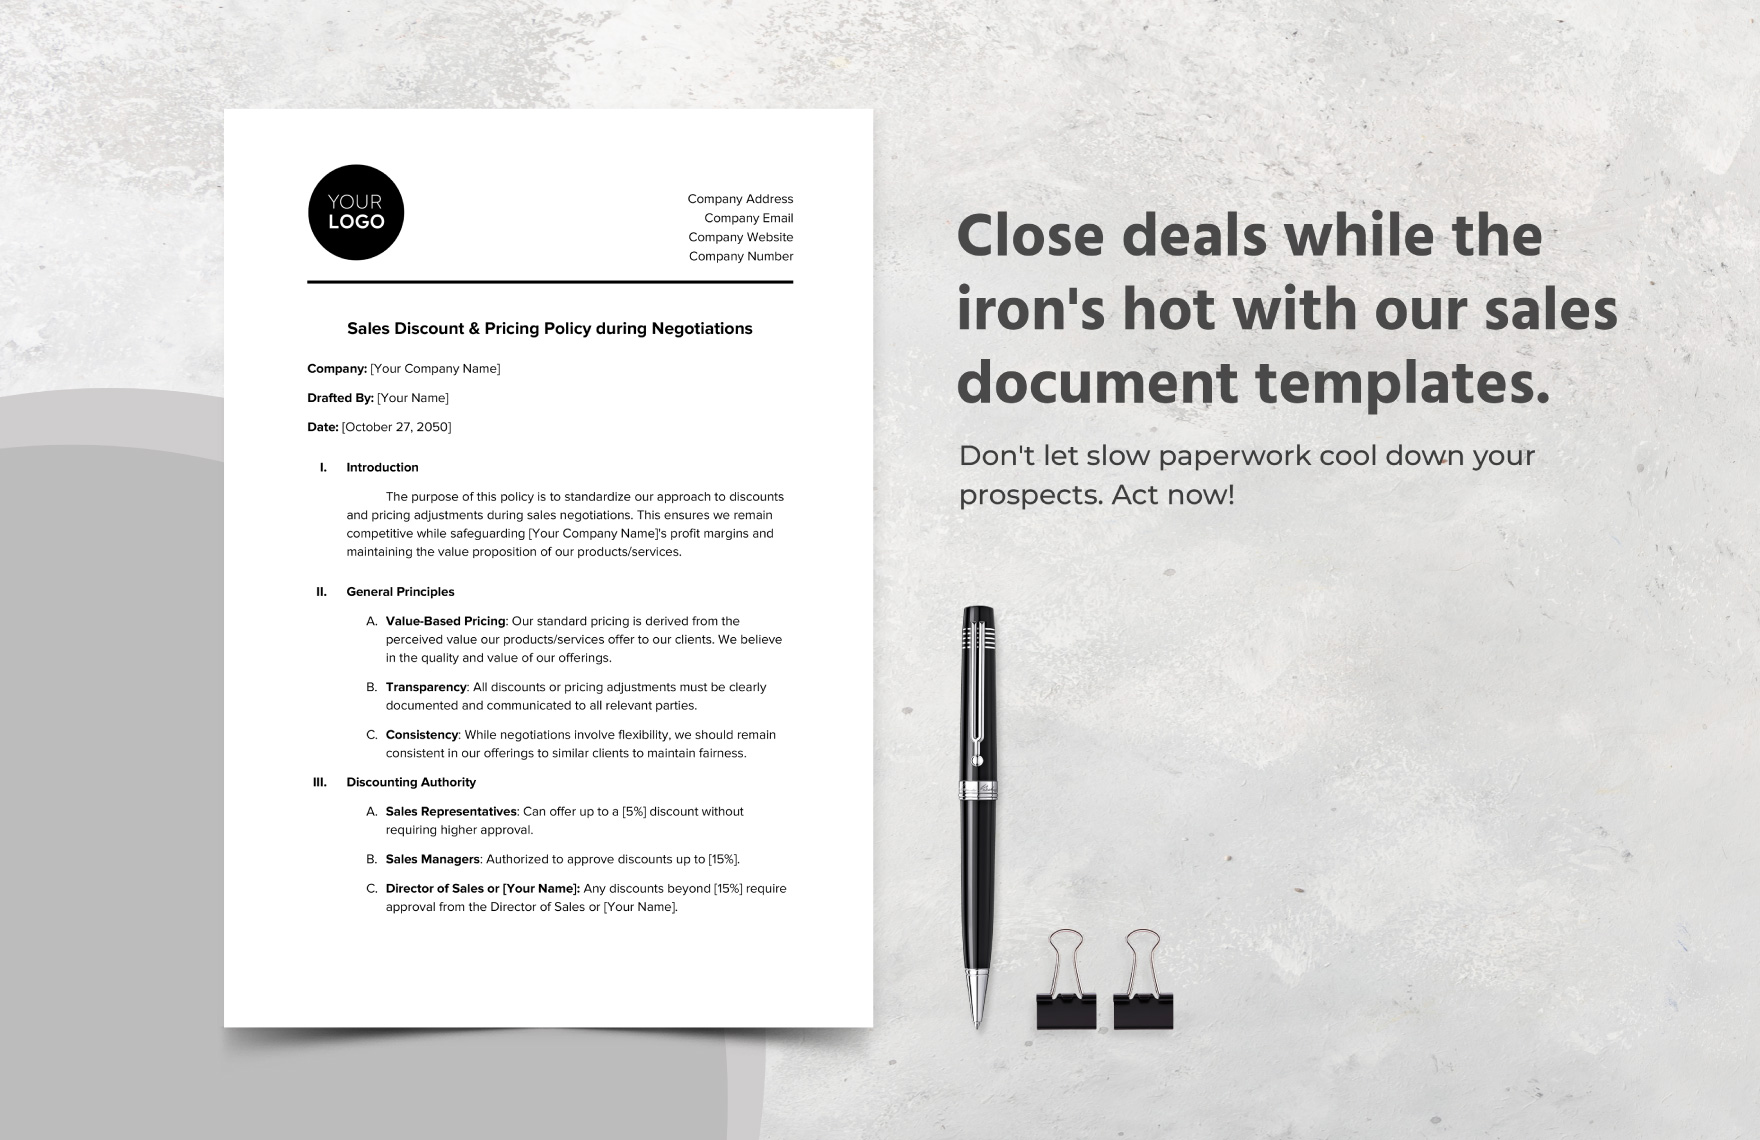 Sales Discount & Pricing Policy during Negotiations Template